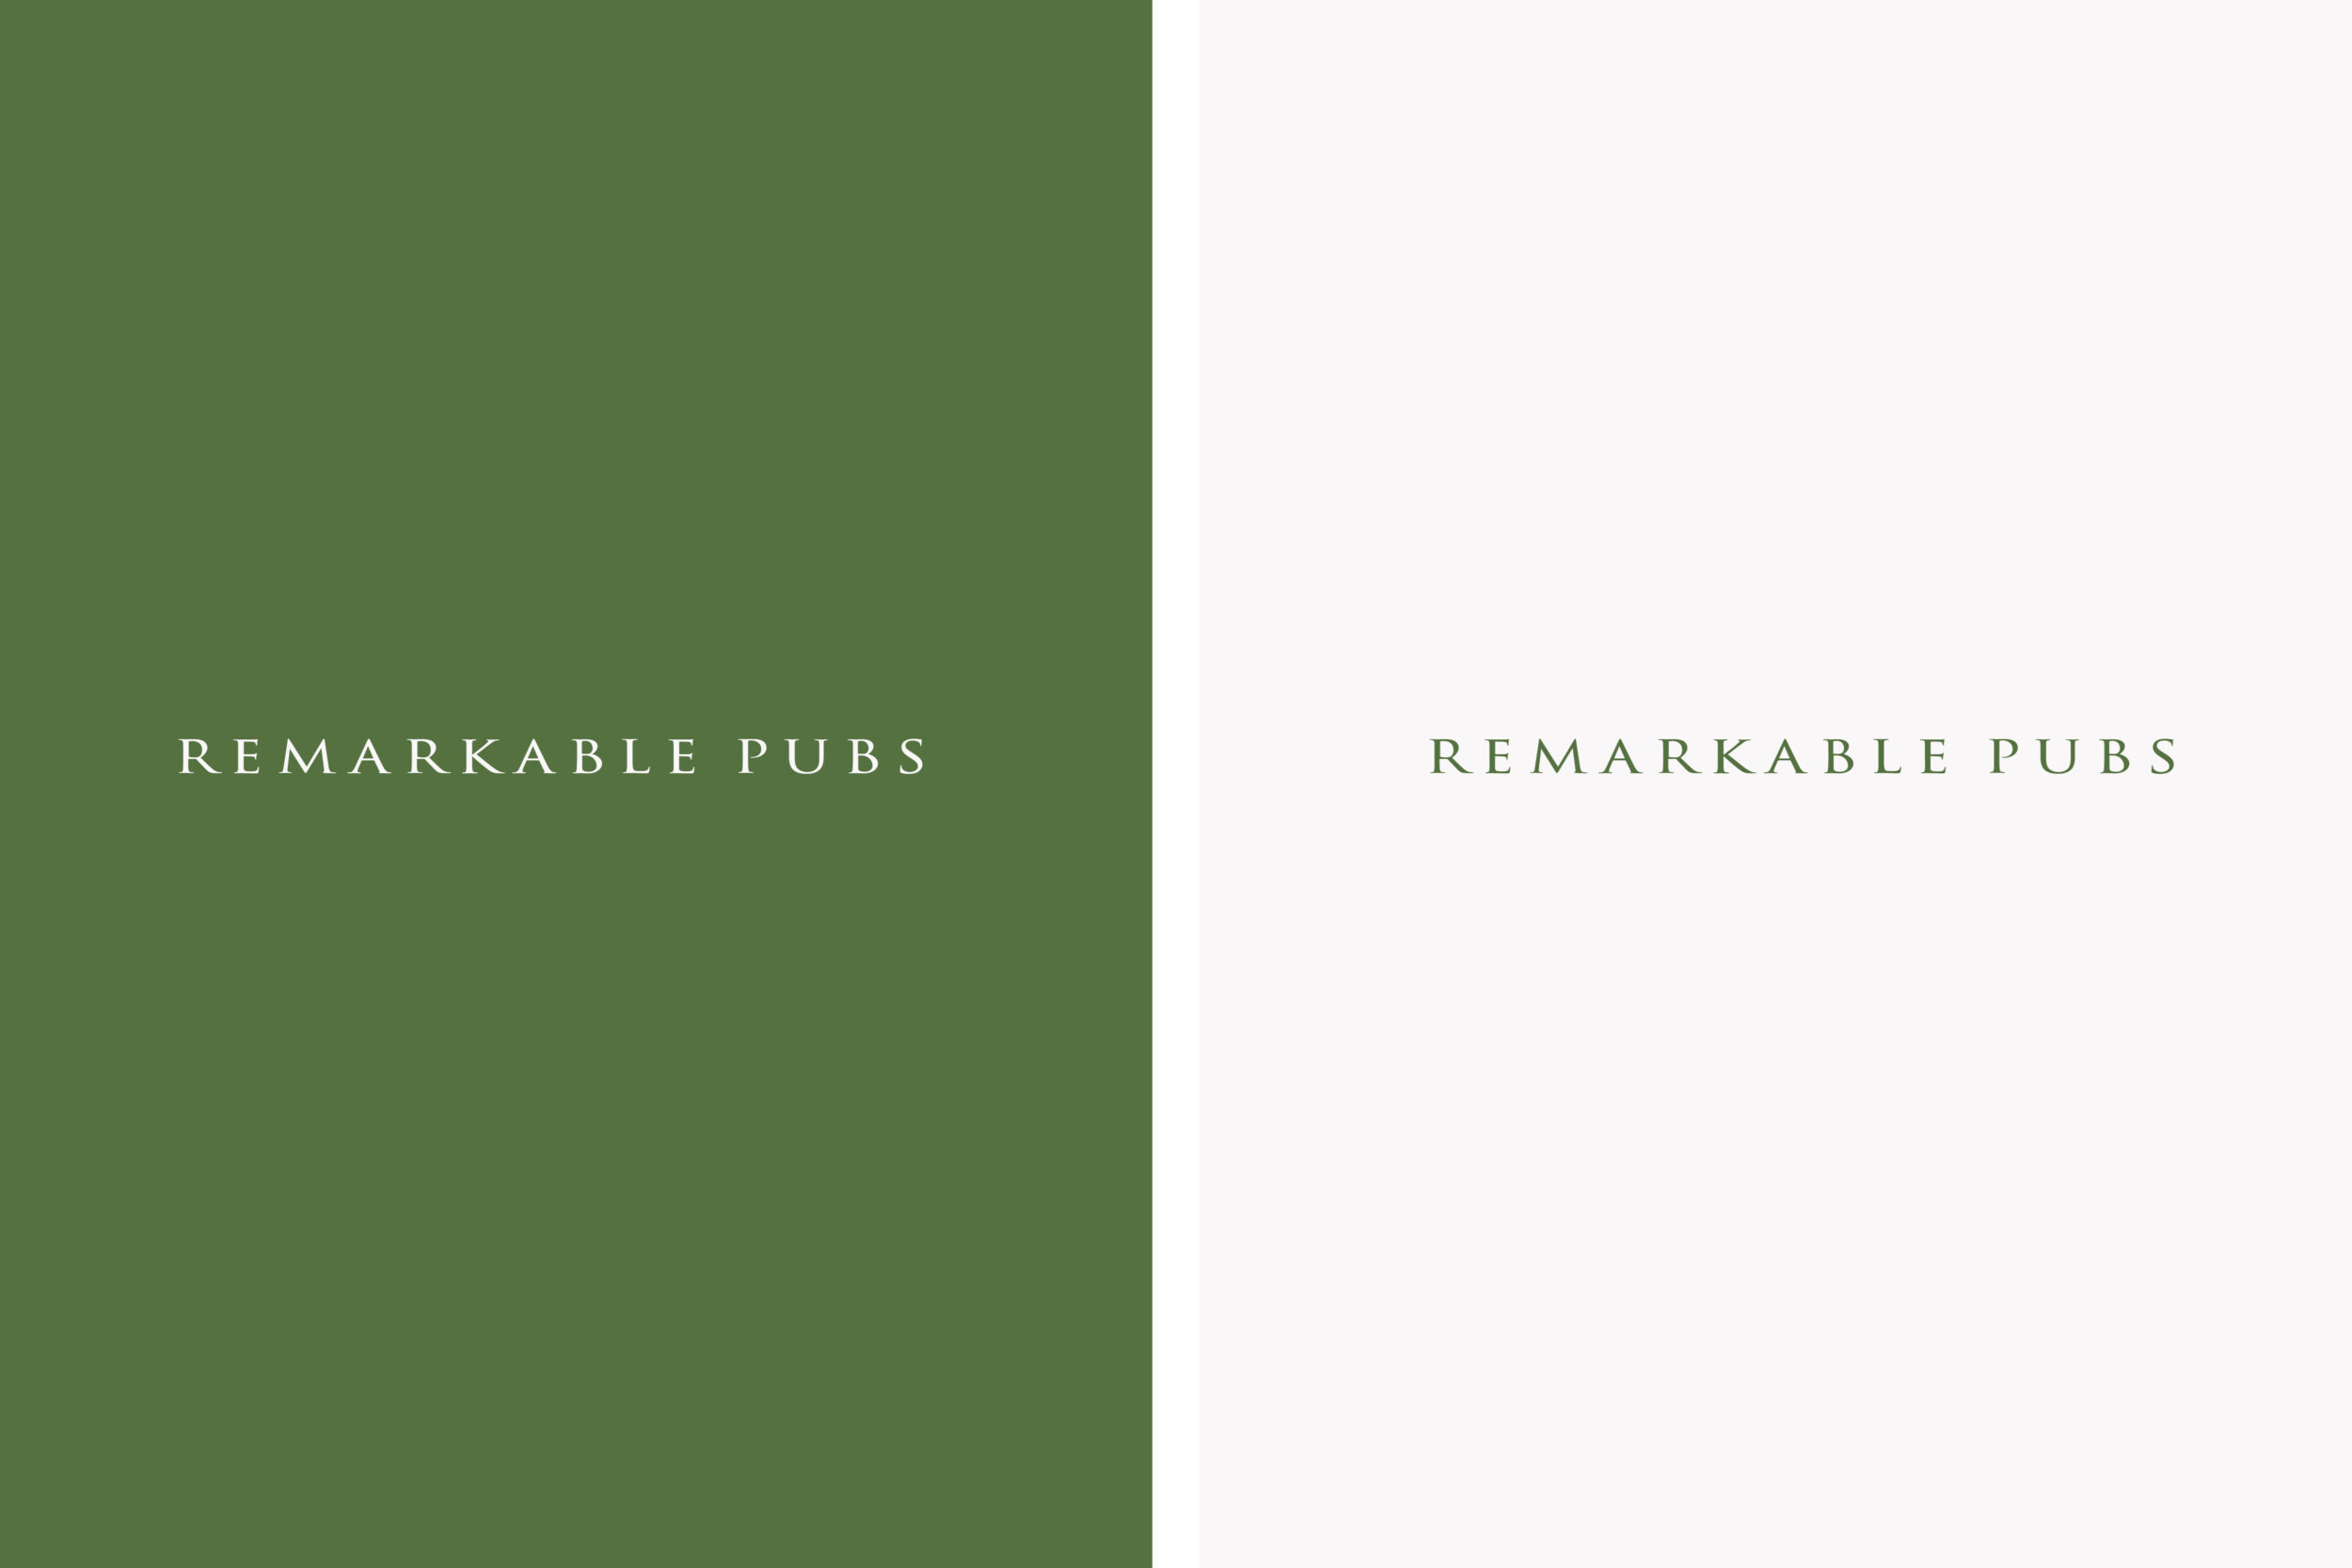 Two logos for Remarkable Pubs. Design by Barefaced Studios, Design Agency in Islington, North London.